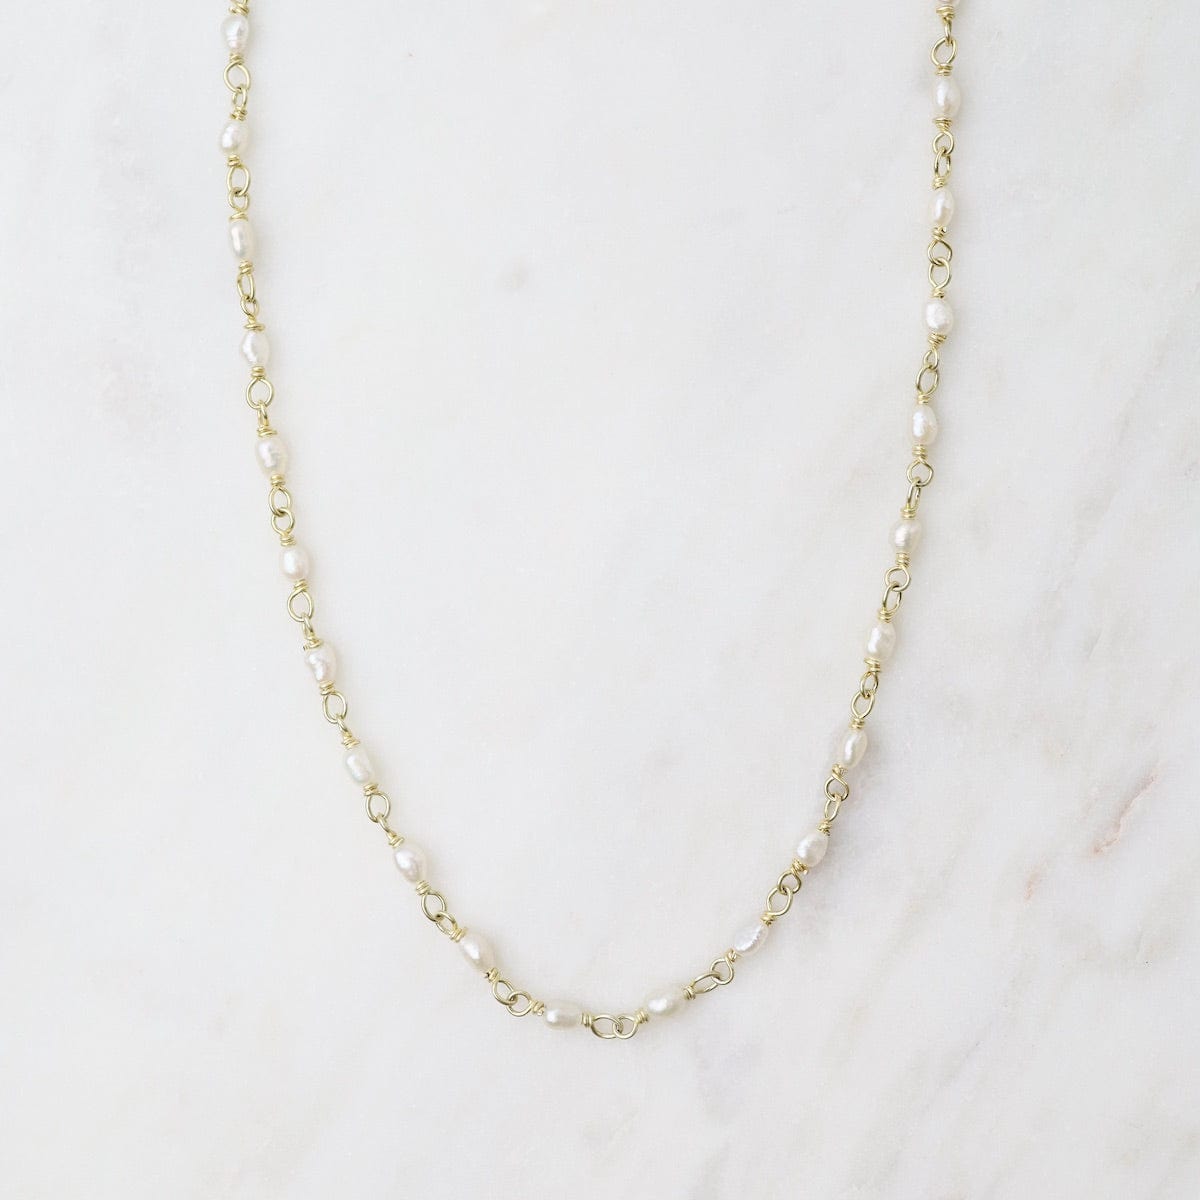 NKL-GF Tiny Pearl Station Necklace